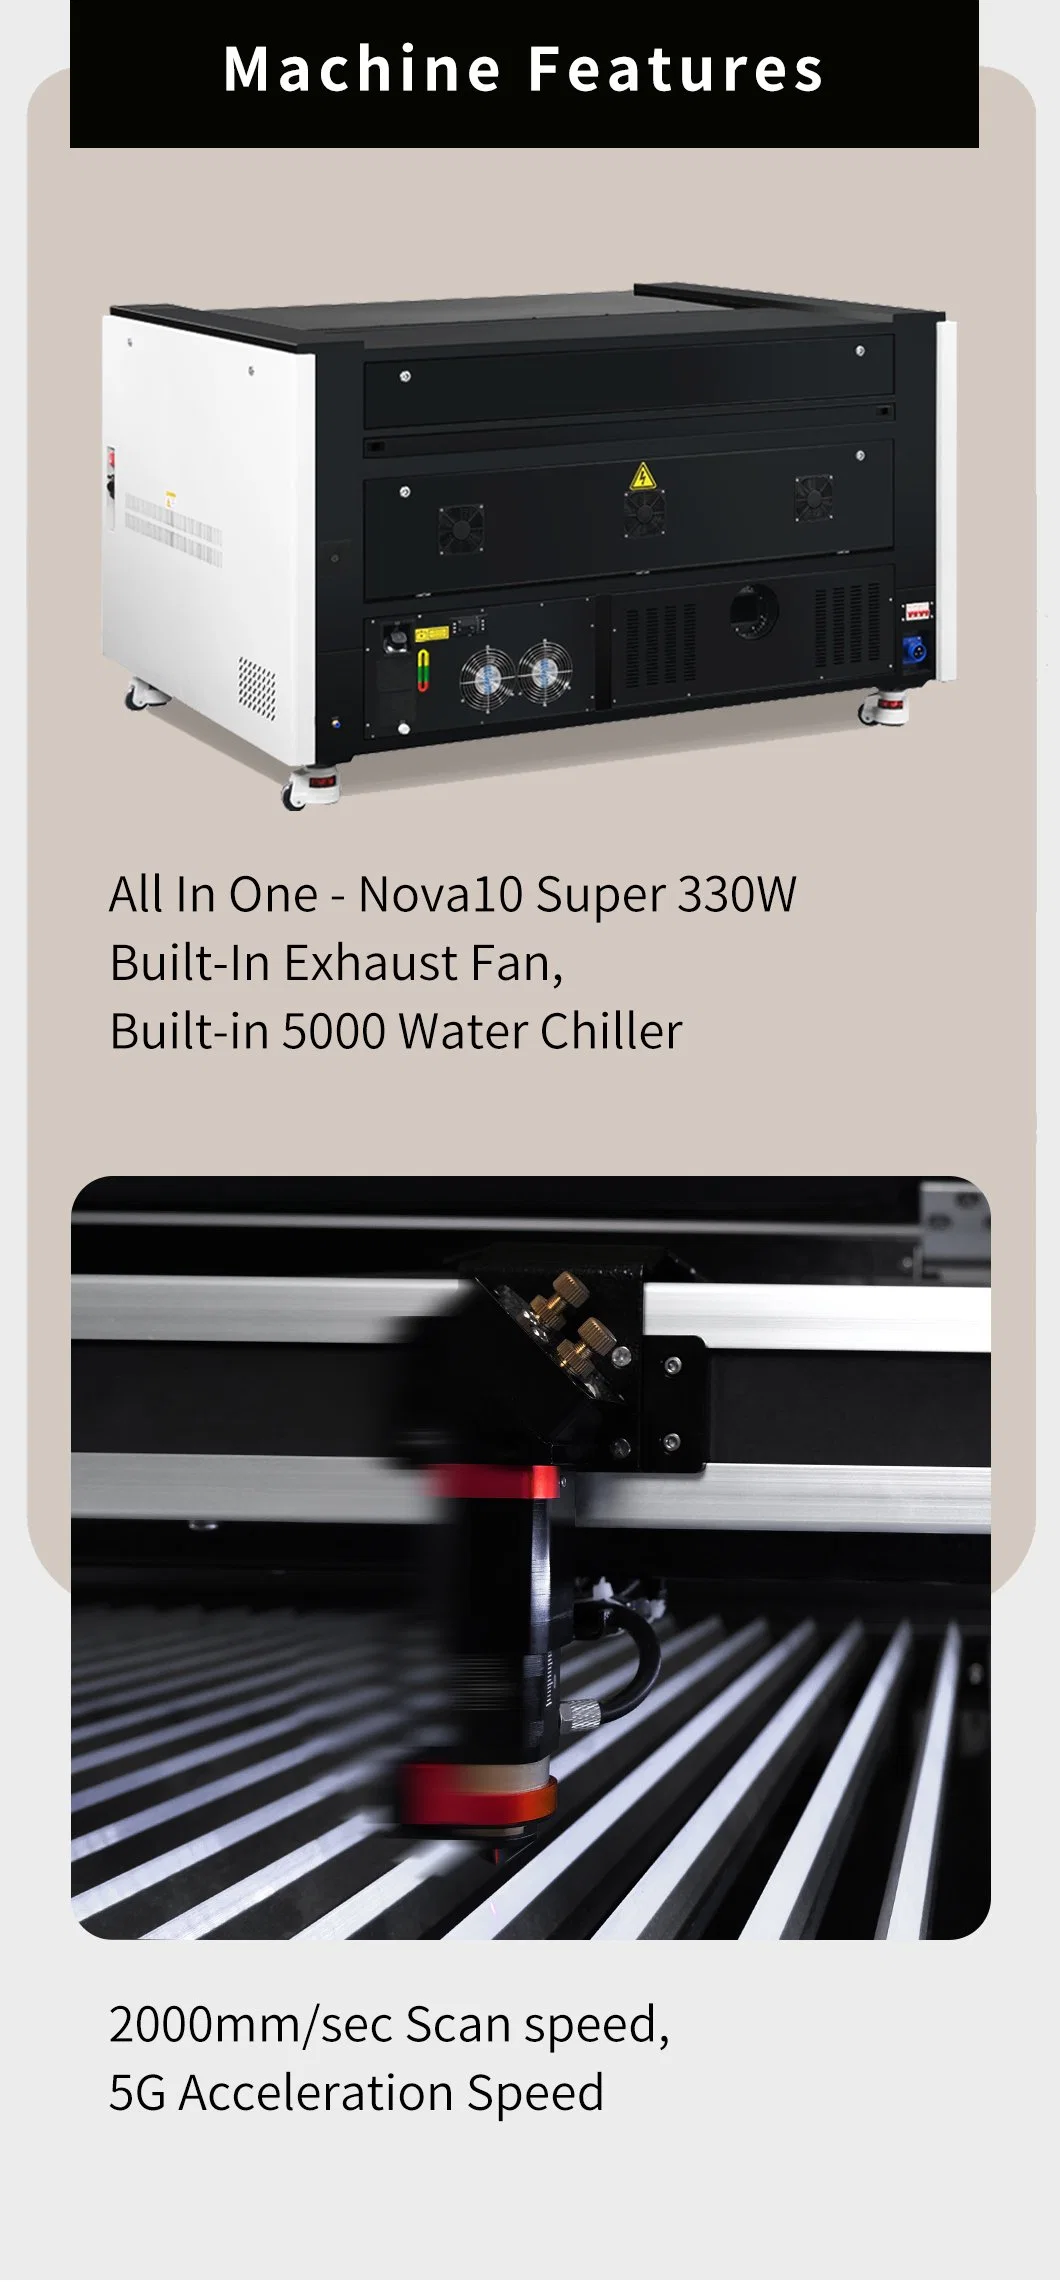 High-Speed CNC CO2 Laser Cutter Engraver 1070/1490/1610 CO2 Laser Machine for Wood/Acrylic/Glass/Plastic/Leather/Plywood/MDF